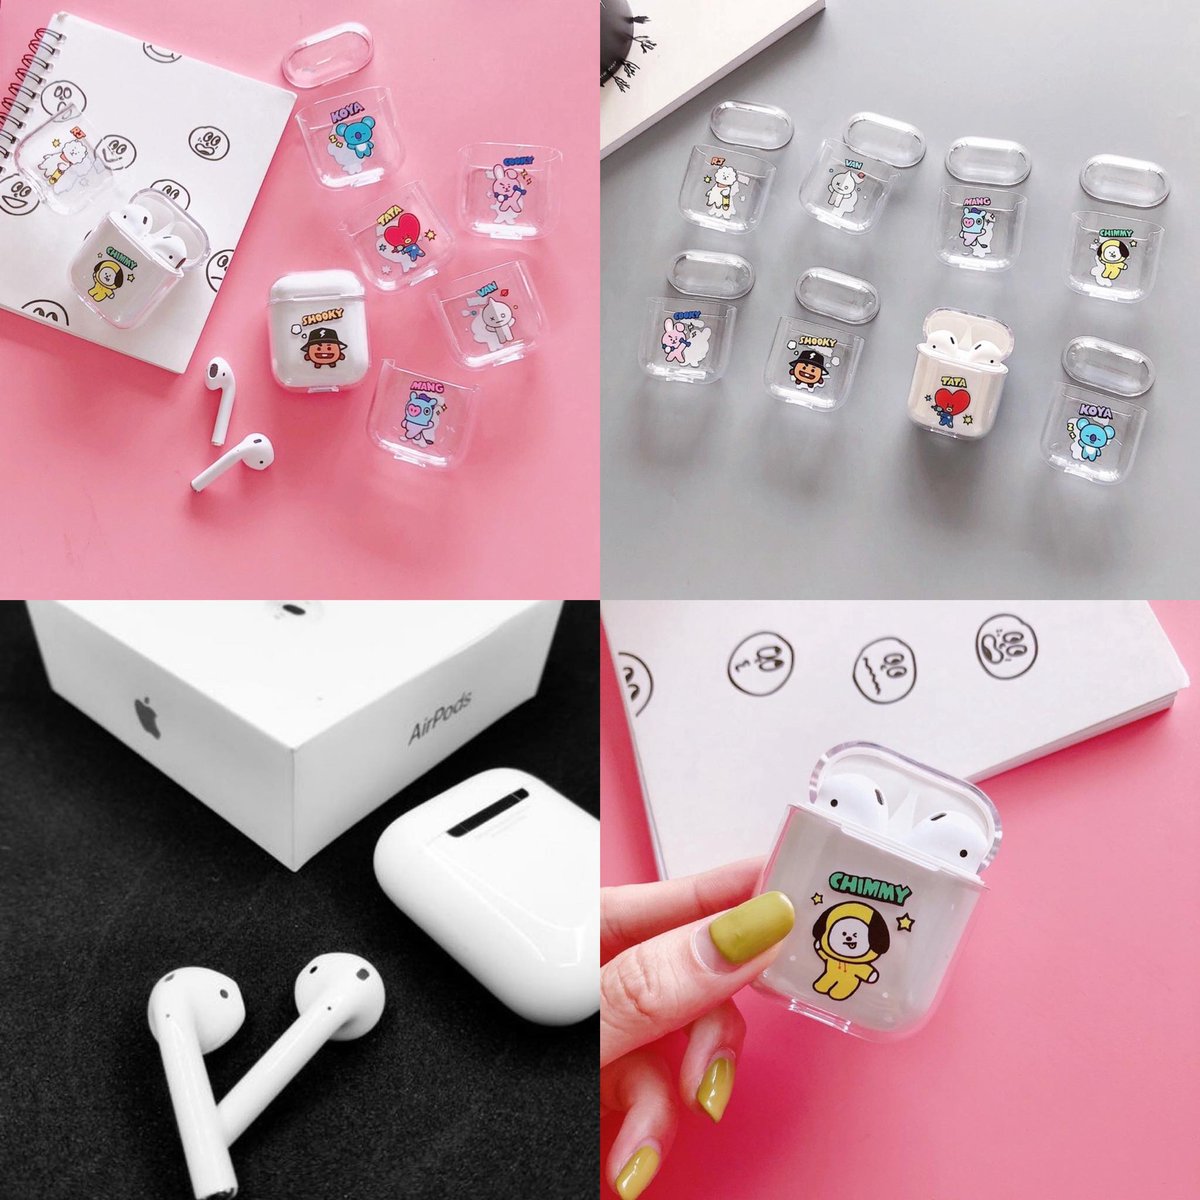 helping a friend | help retweetig: @/bangtan.chinguuAirpods 2nd gen premium quality 2,000php only!with free BT21 clear caseAPPLE AIRPODS 2 Premium CopyInclusions:ManualCableBoxDM to order/detailswts lfb bts ph 